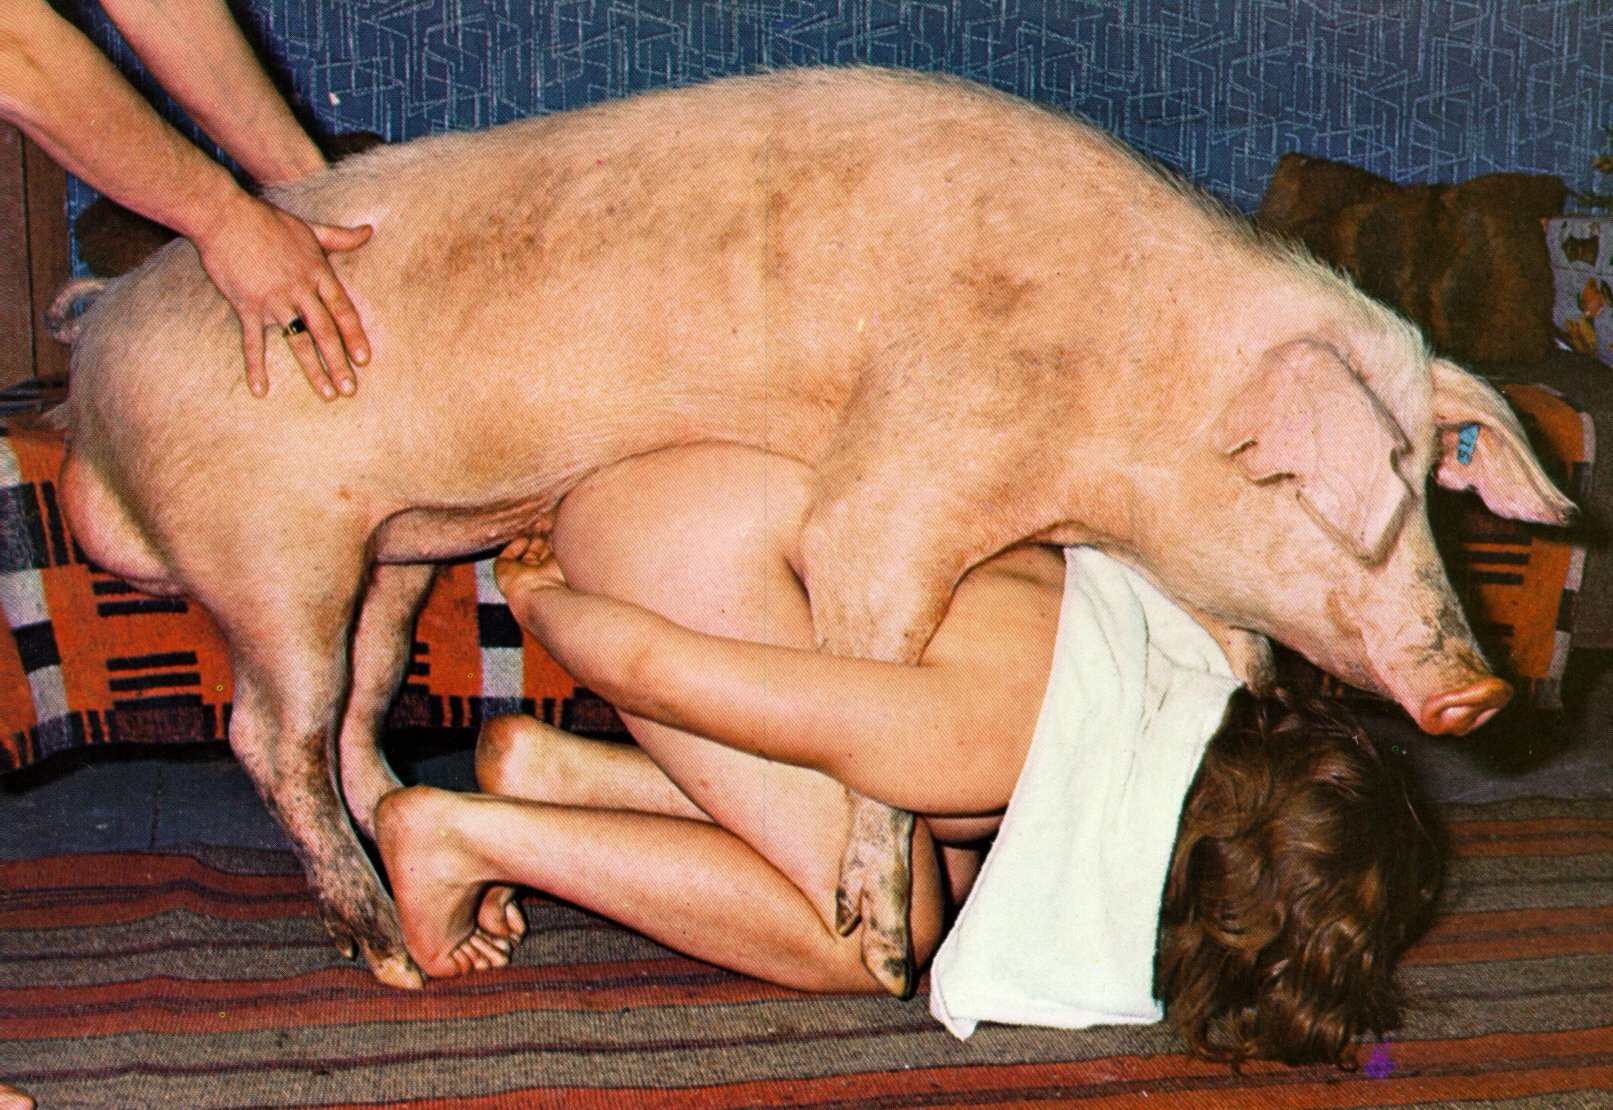 Pig and girl sex